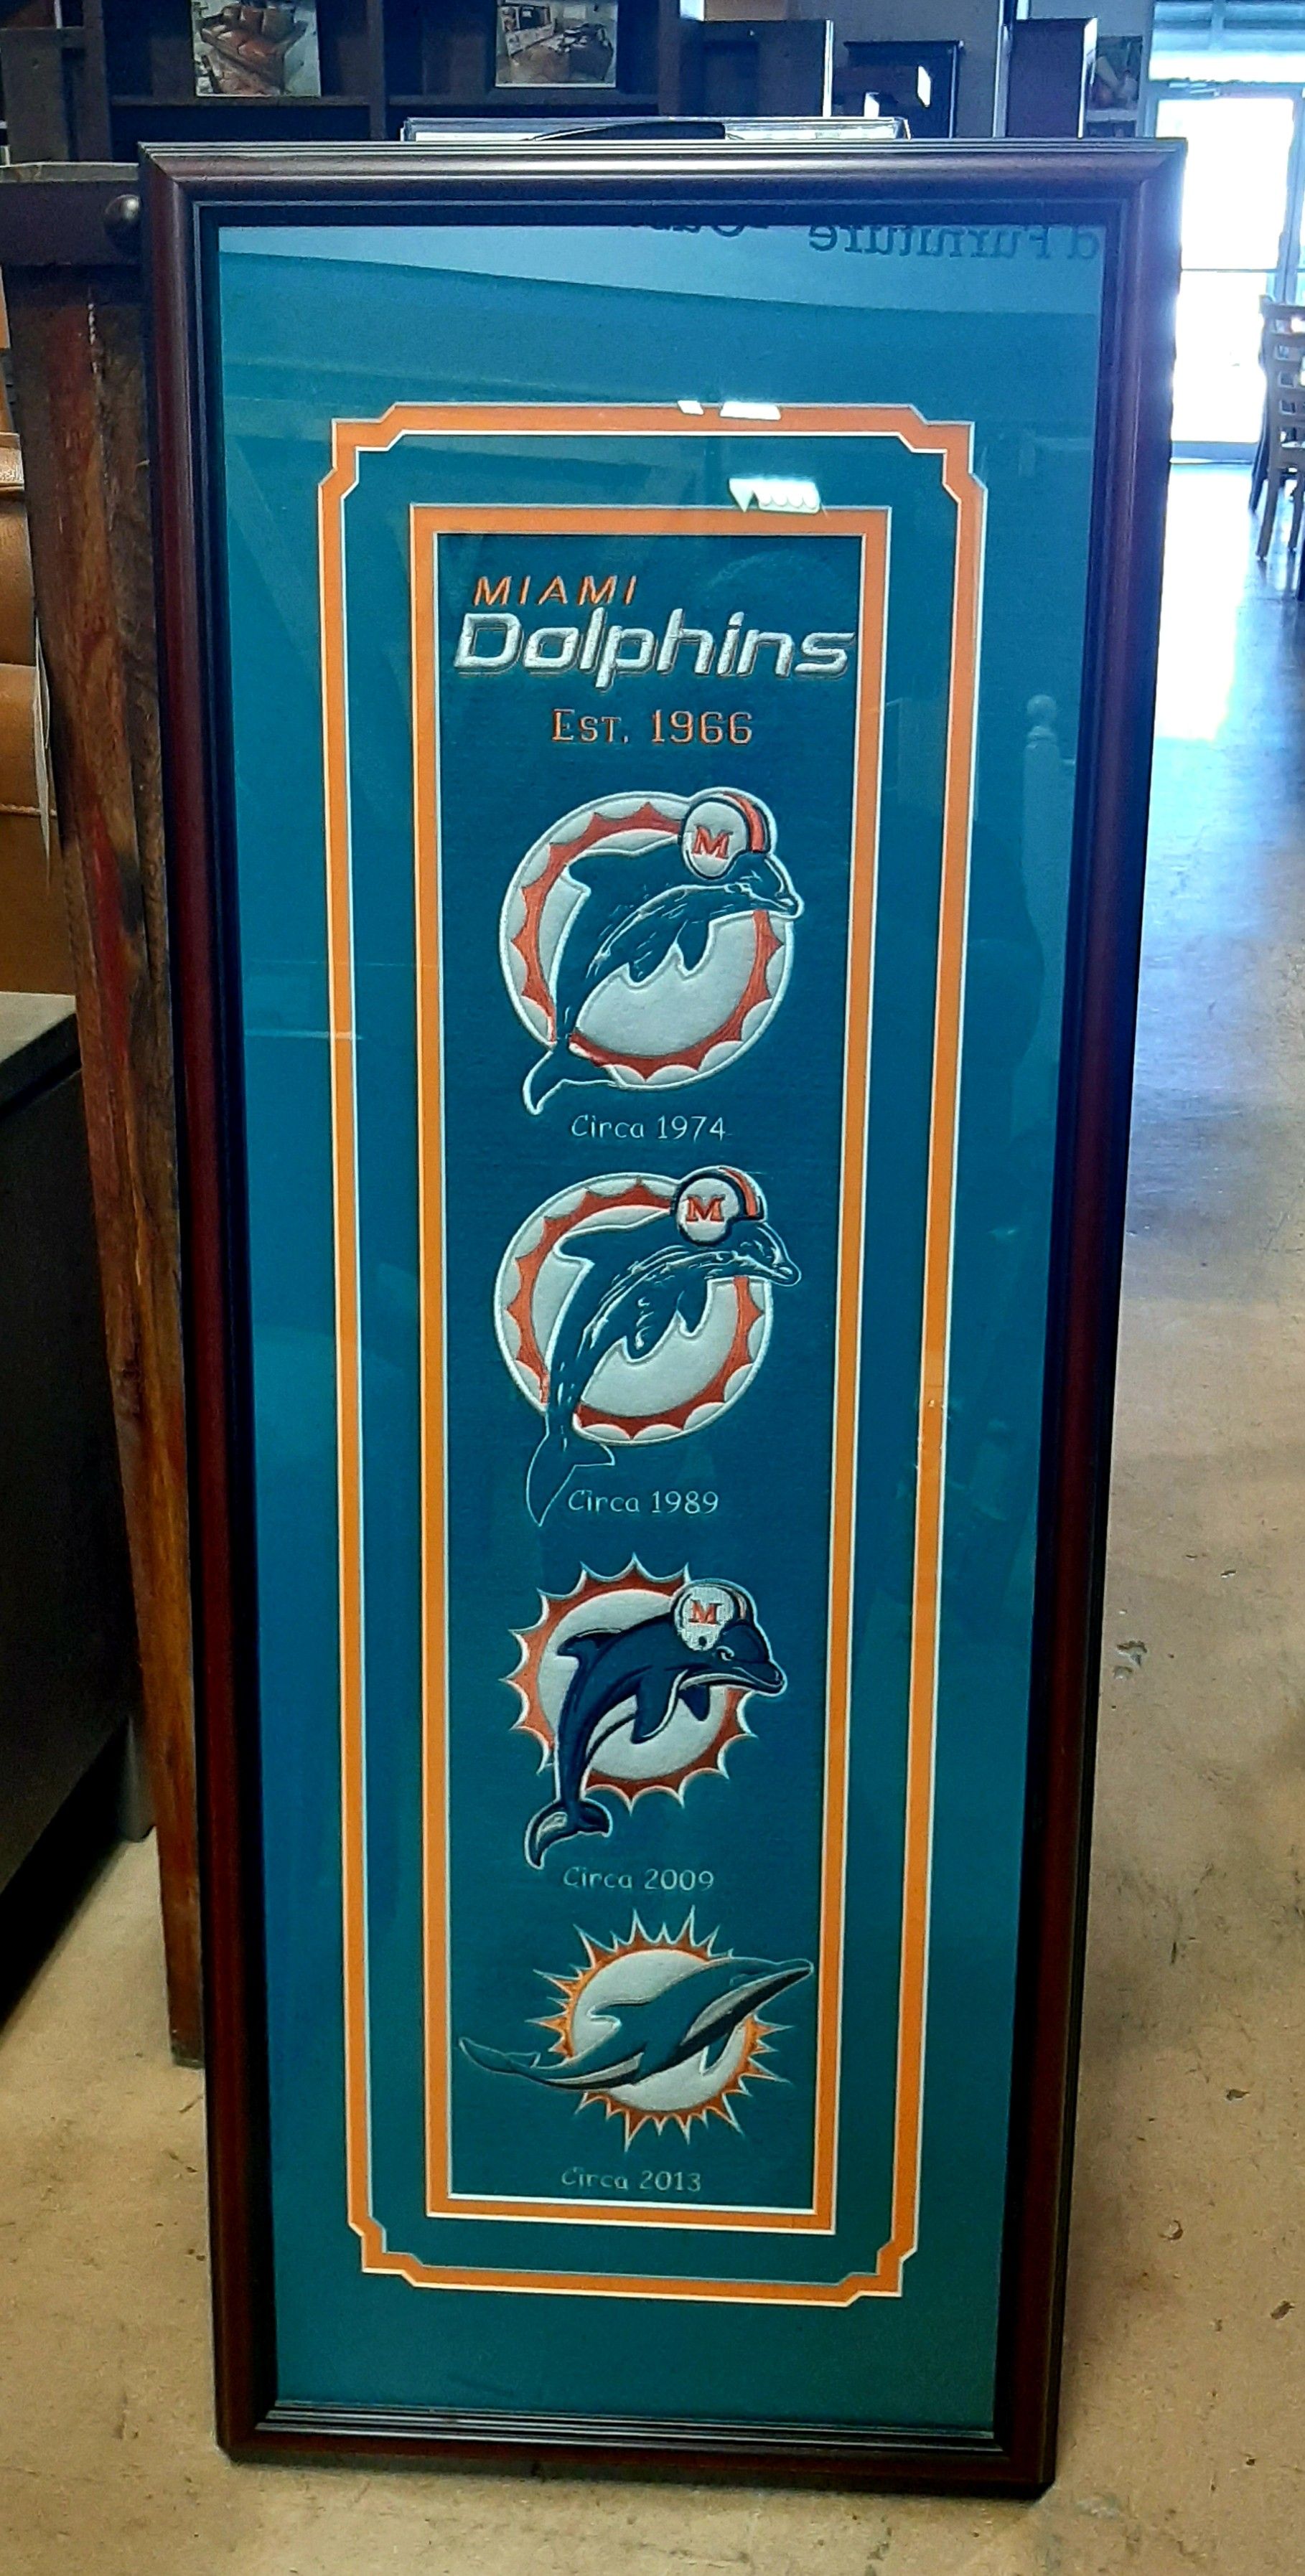 Miami dolphin wall banner